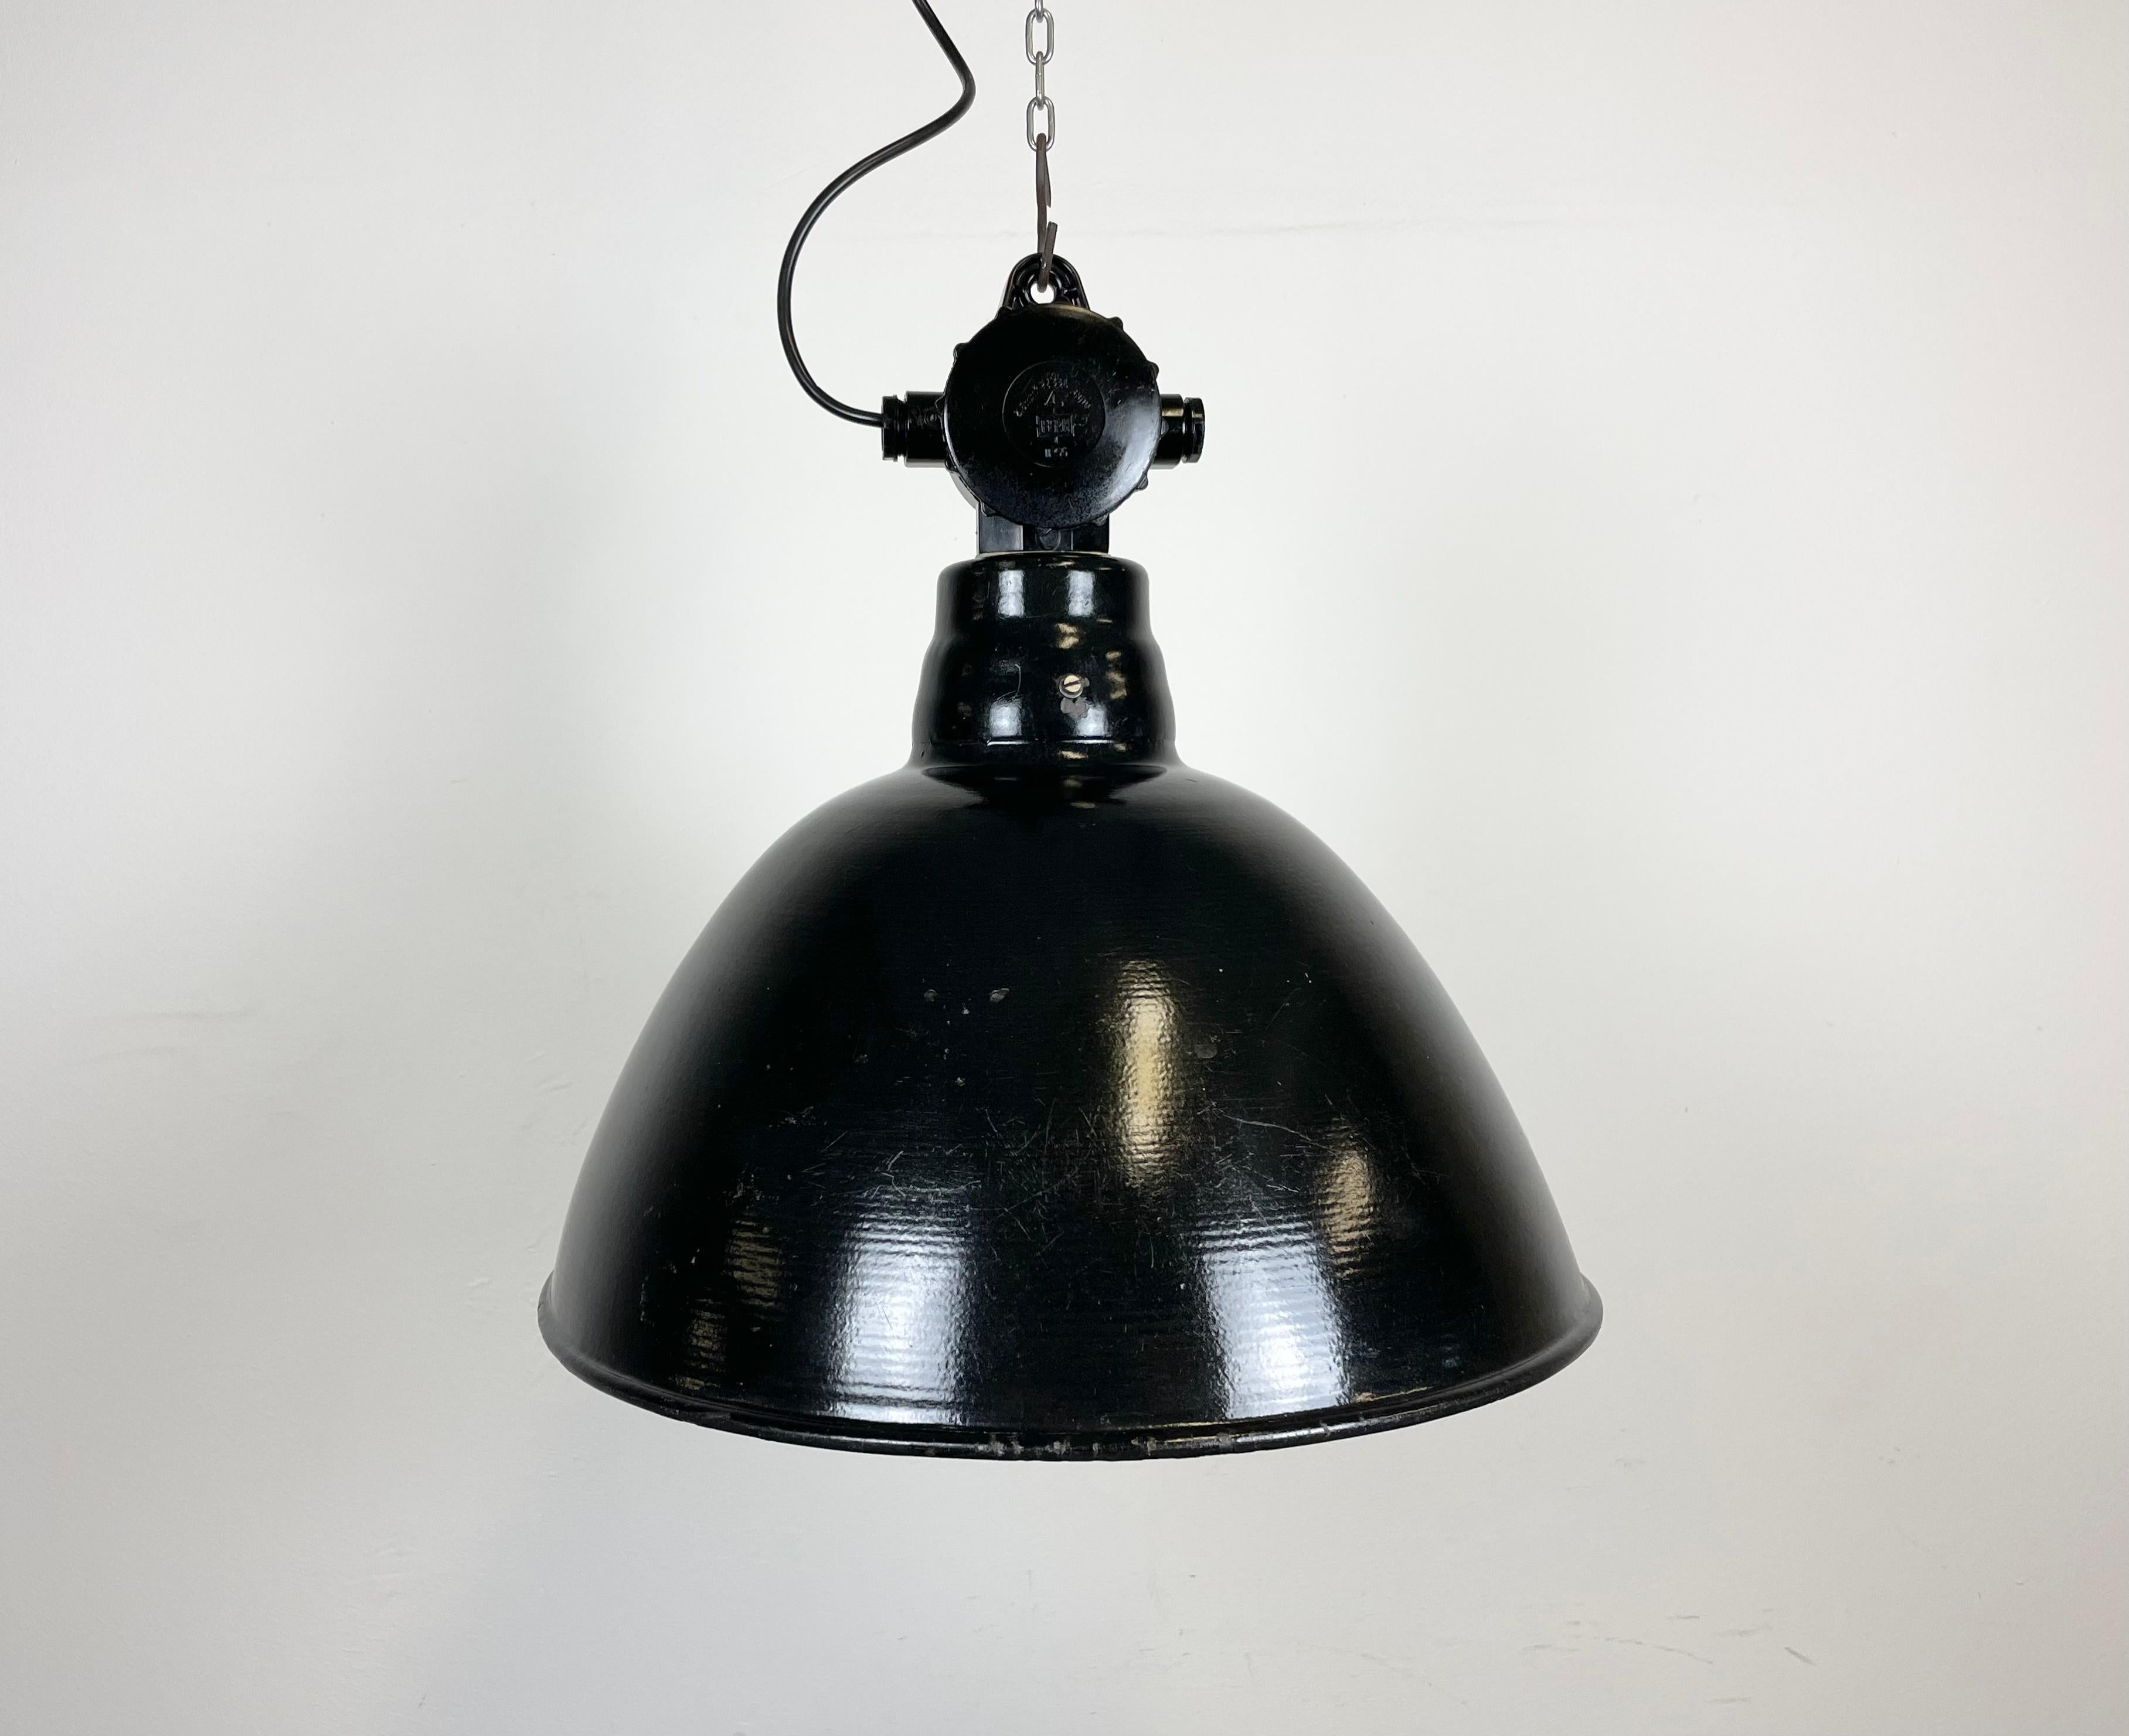 Industrial enamel factory light made by Lbd Veb Leuchtenbau Dresden in East Germany during the 1950s.It features black enamel shade with white enamel interior and bakelite top.The porcelain socket requires E 27 light bulbs. New wire. The weight of